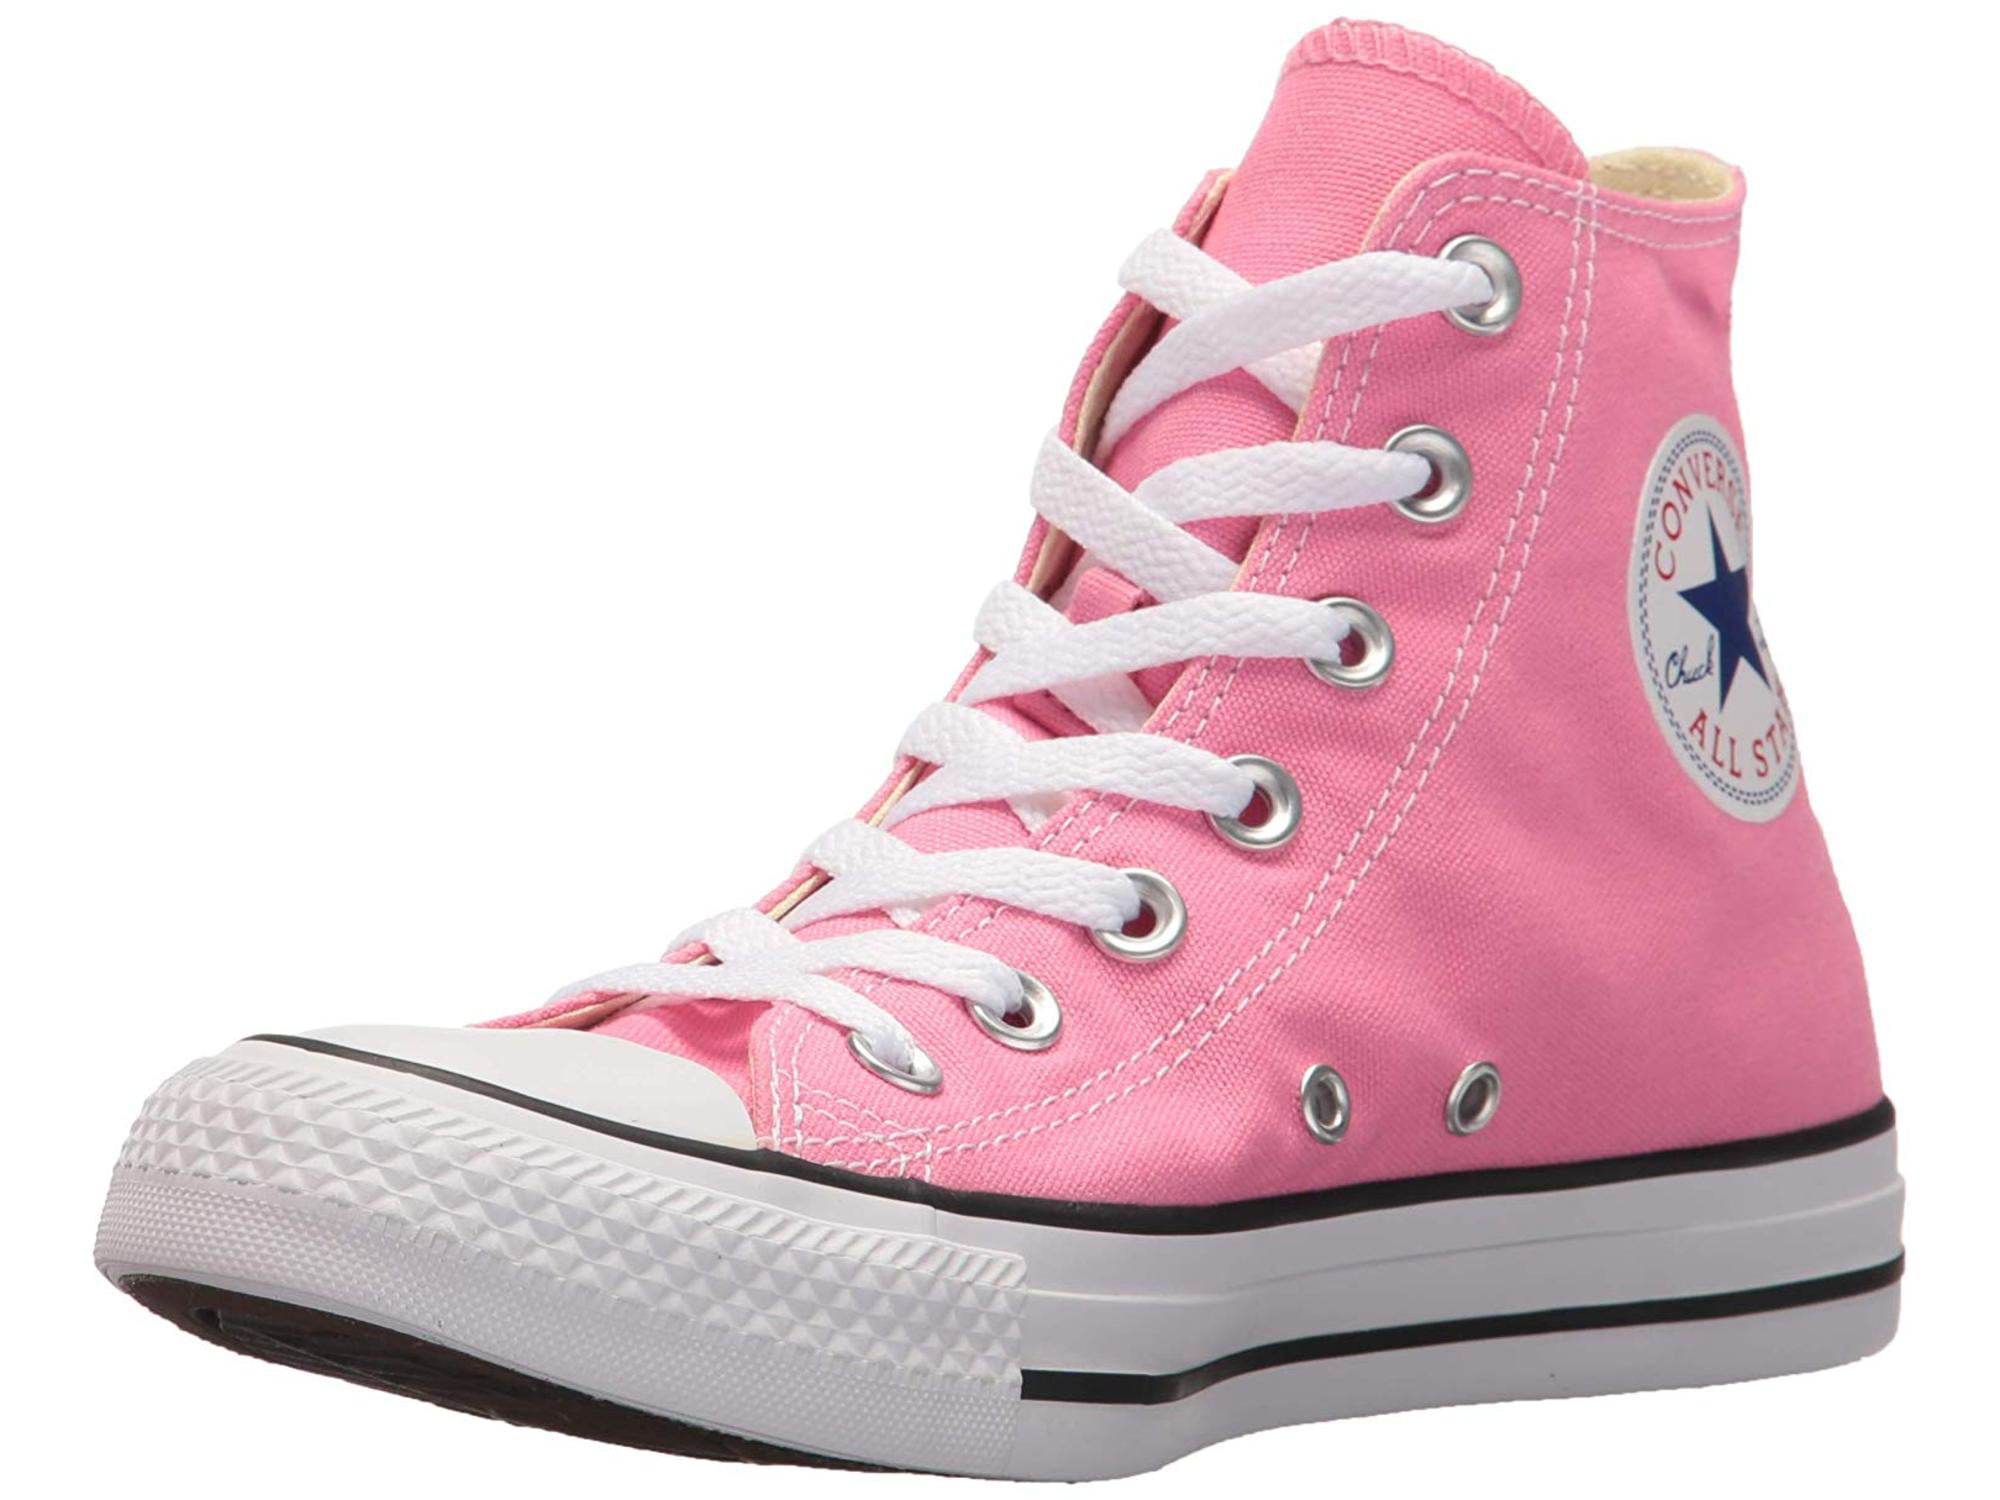 pale pink high top converse